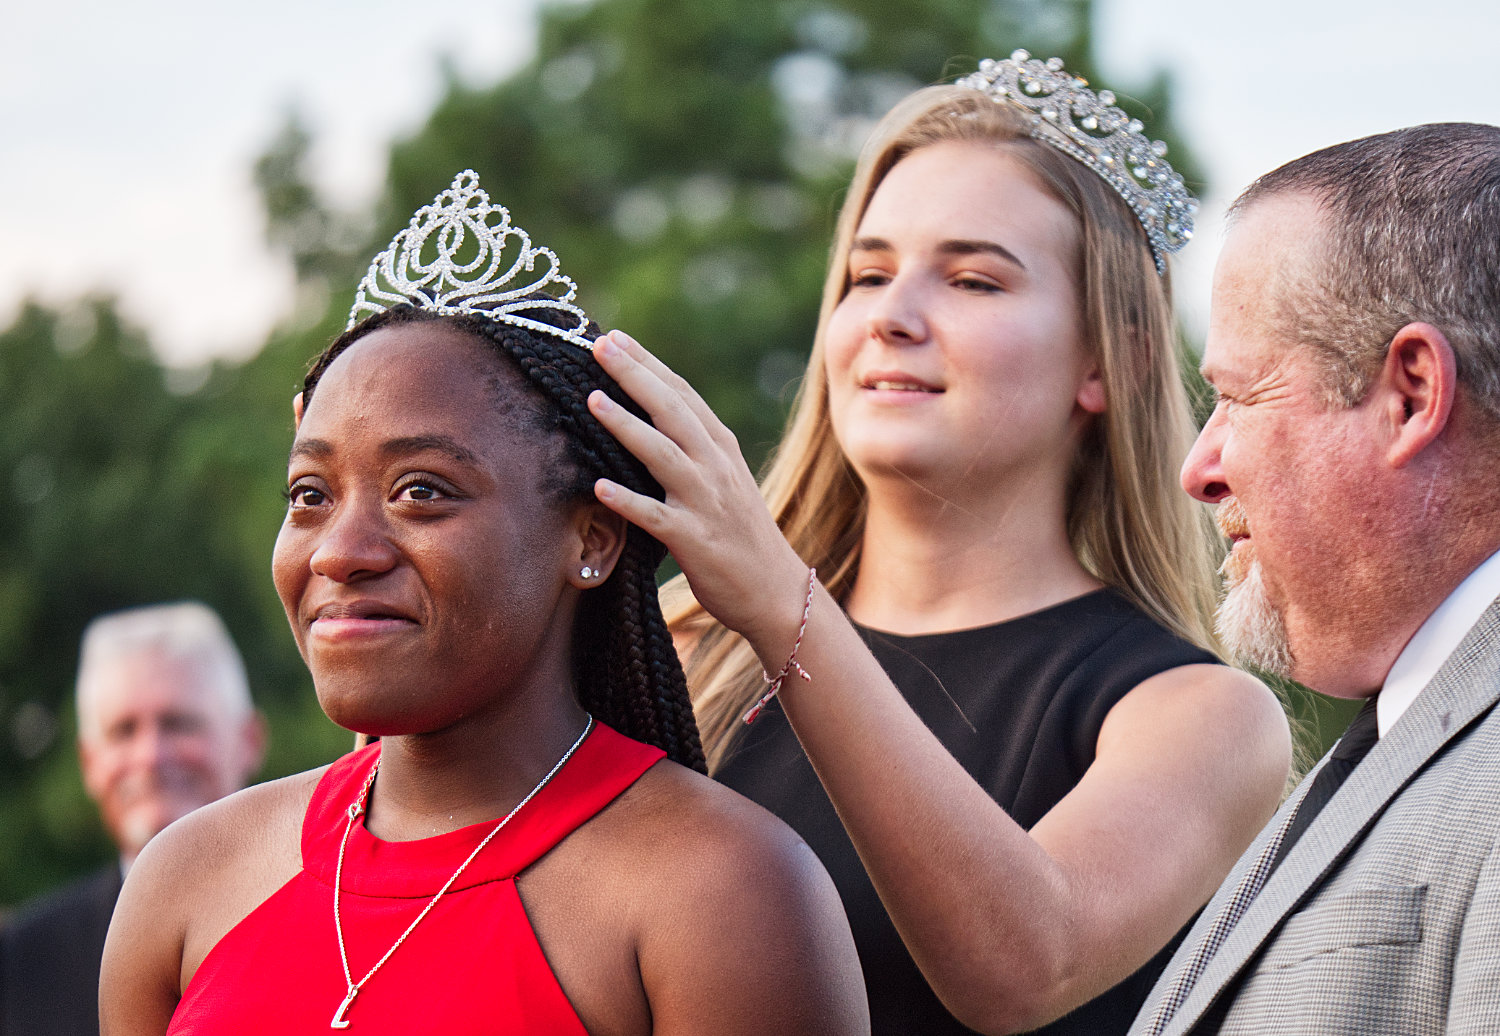 Lovely Wright is crowned Minoela 2019 homecoming queen by last year’s queen, Lena Hughes, as Wright’s escort, youth Pastor Kendall Banks looks on prior to Friday’s football game with Farmersville (which the Yellowjackets won handily).